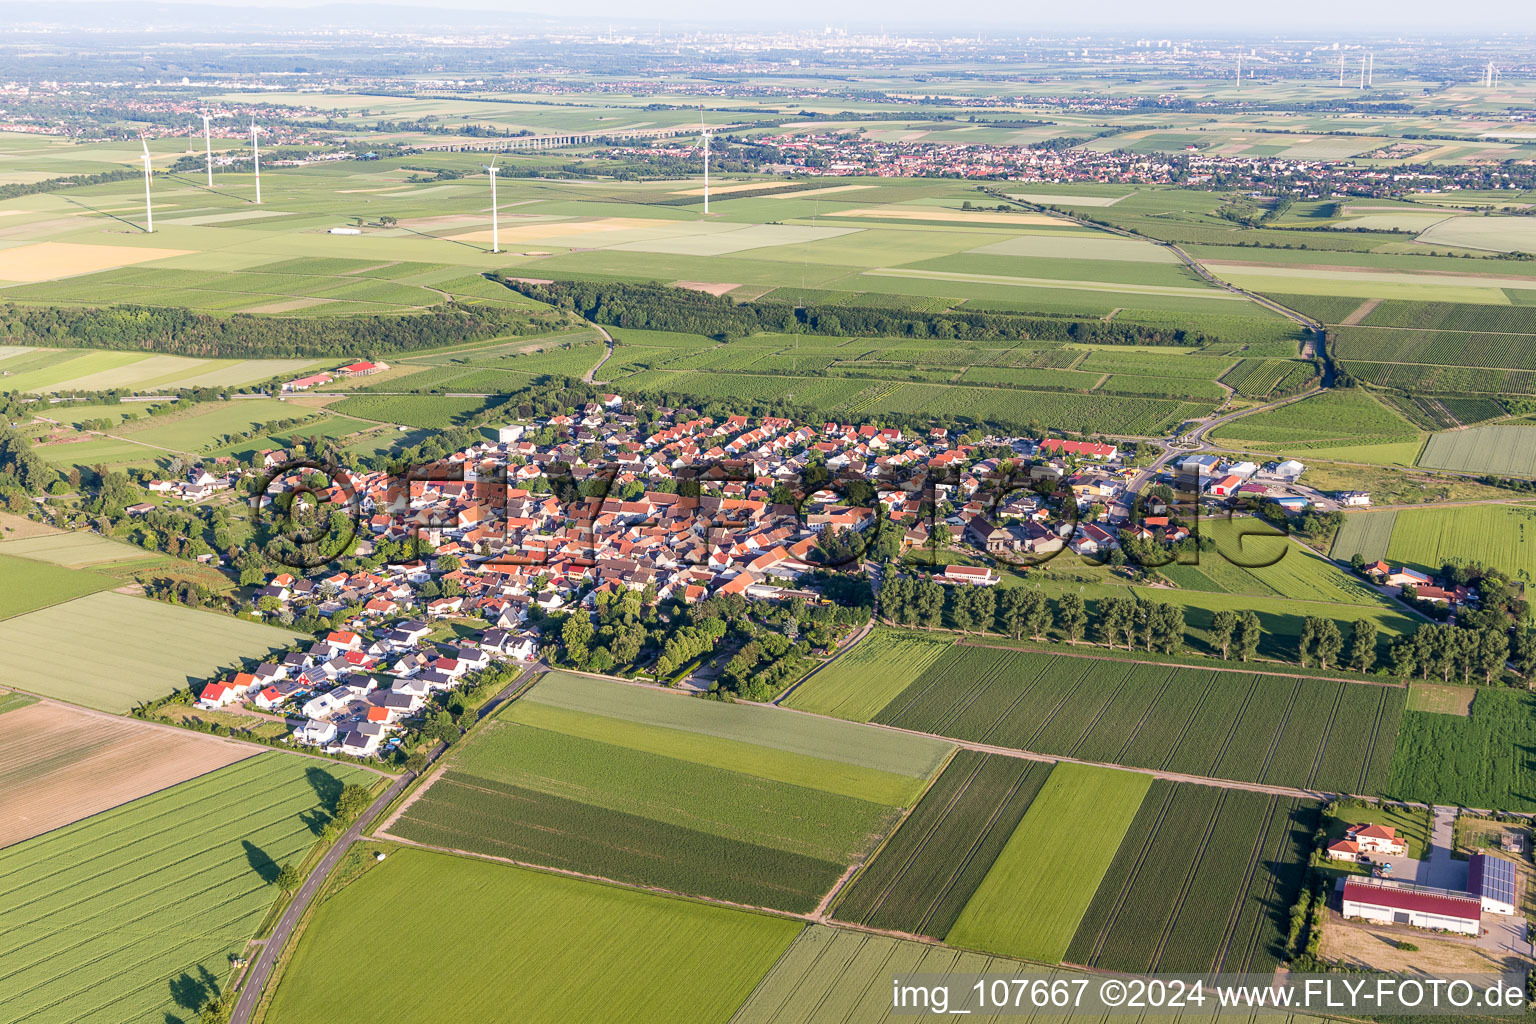 Agricultural land and field borders surround the settlement area of the village in Moerstadt in the state Rhineland-Palatinate, Germany